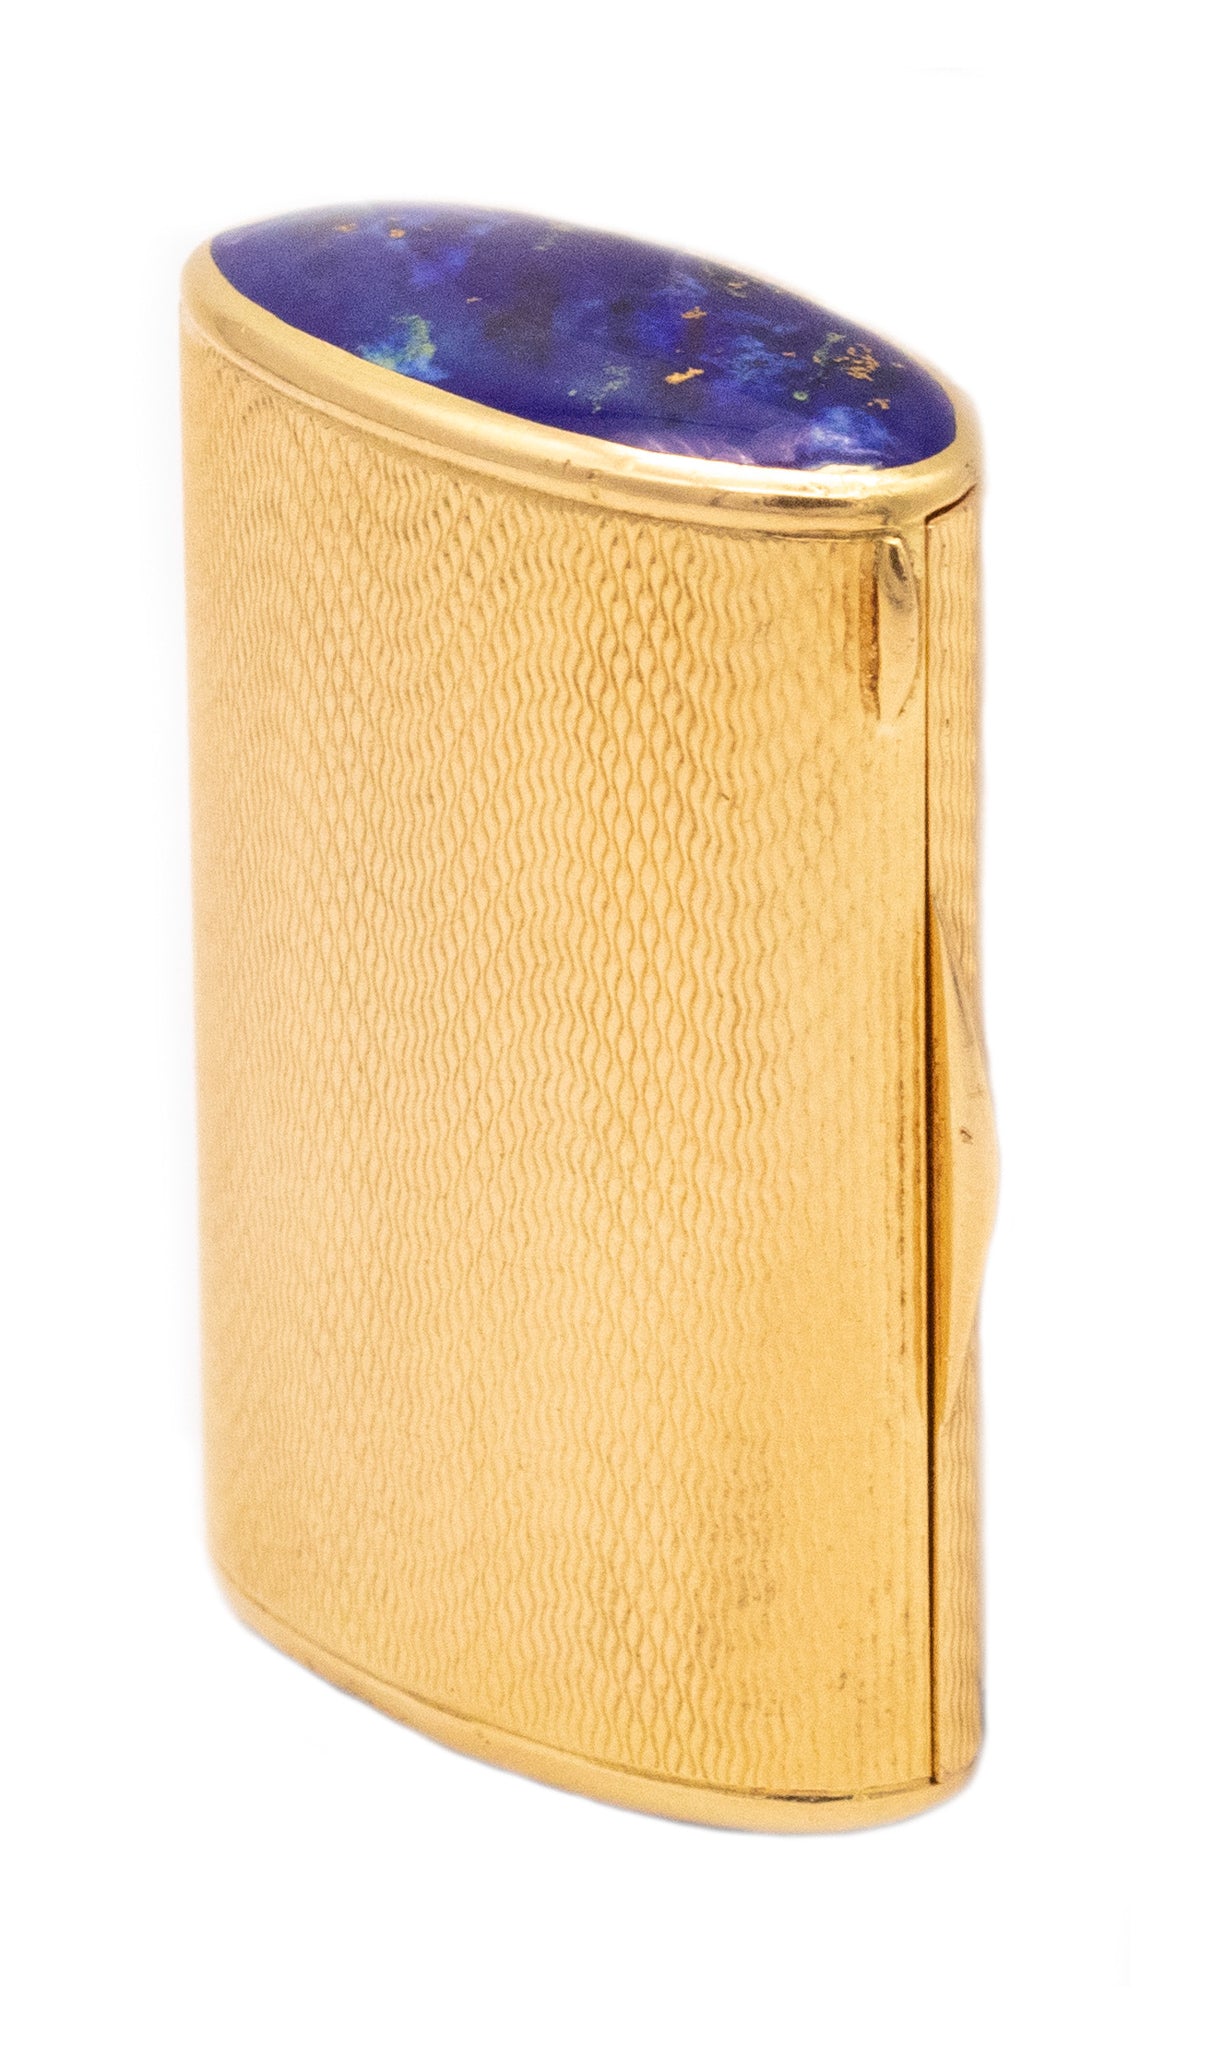 CARTIER 1950 VINTAGE PILL BOX IN 18 KT YELLOW GOLD WITH GUILLOCHE AND ENAMEL